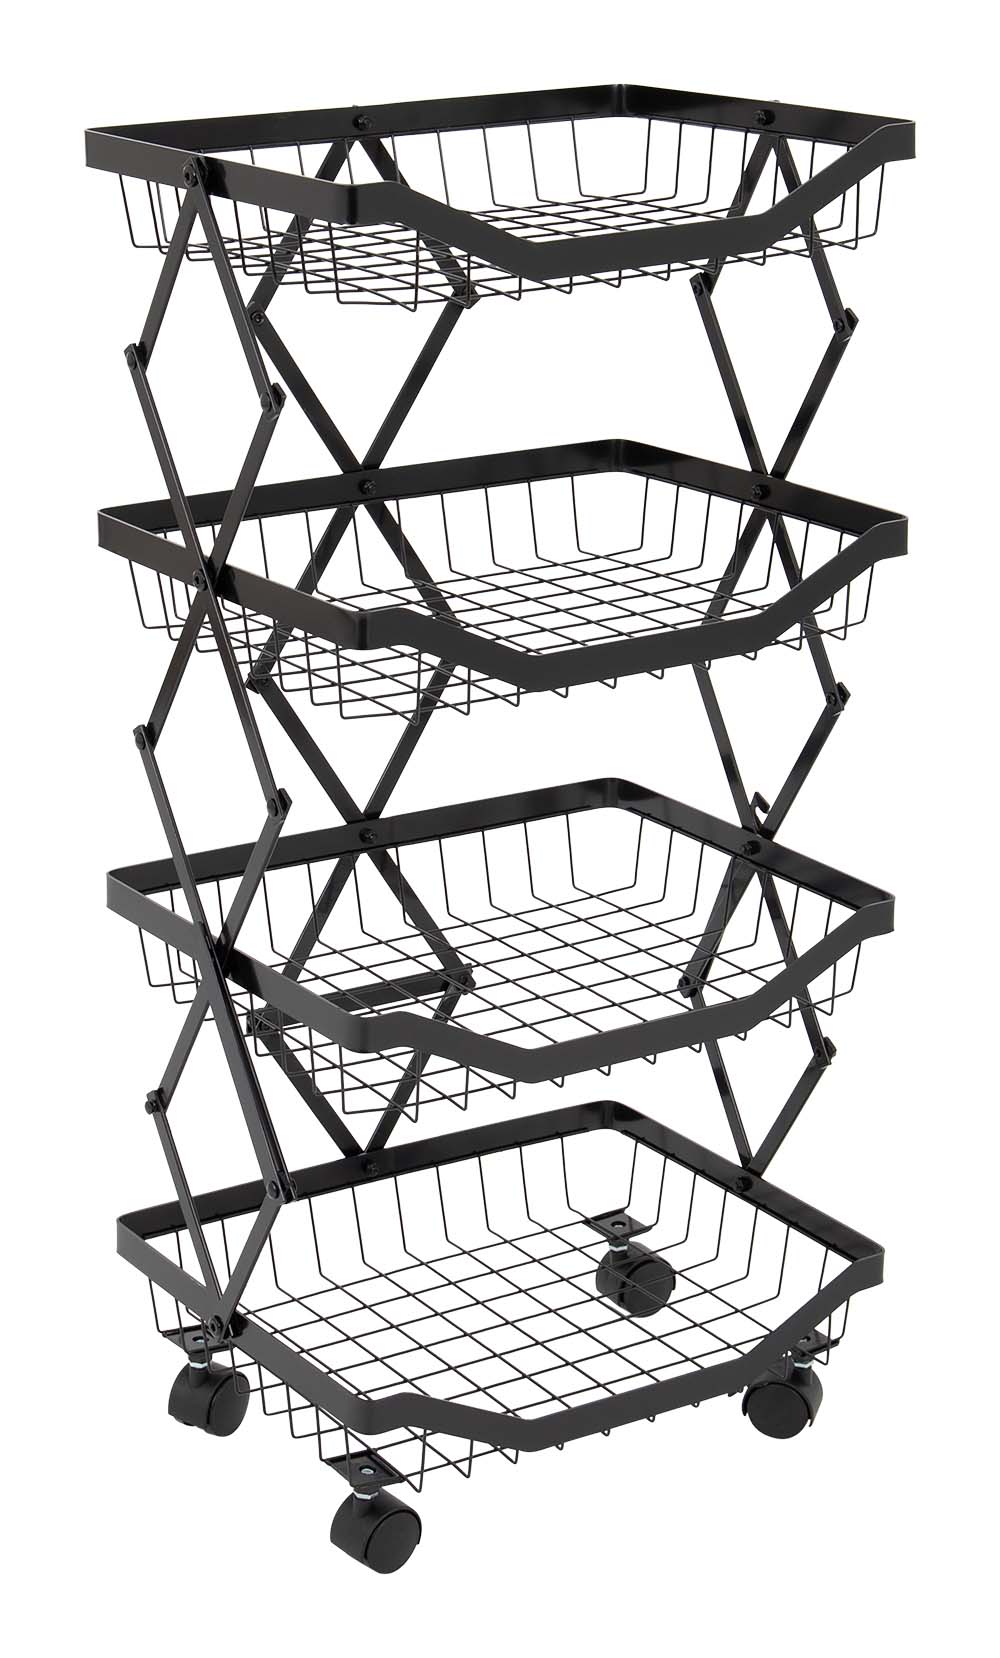 1609299 A collapsible and sturdy steel storage rack from the Industrial collection. The rack has 4 baskets so it offers a lot of storage space. In addition, it is easy to carry because the rack is foldable with a height of 19.5 cm. Furthermore, the rack also has wheels making it easy to move.